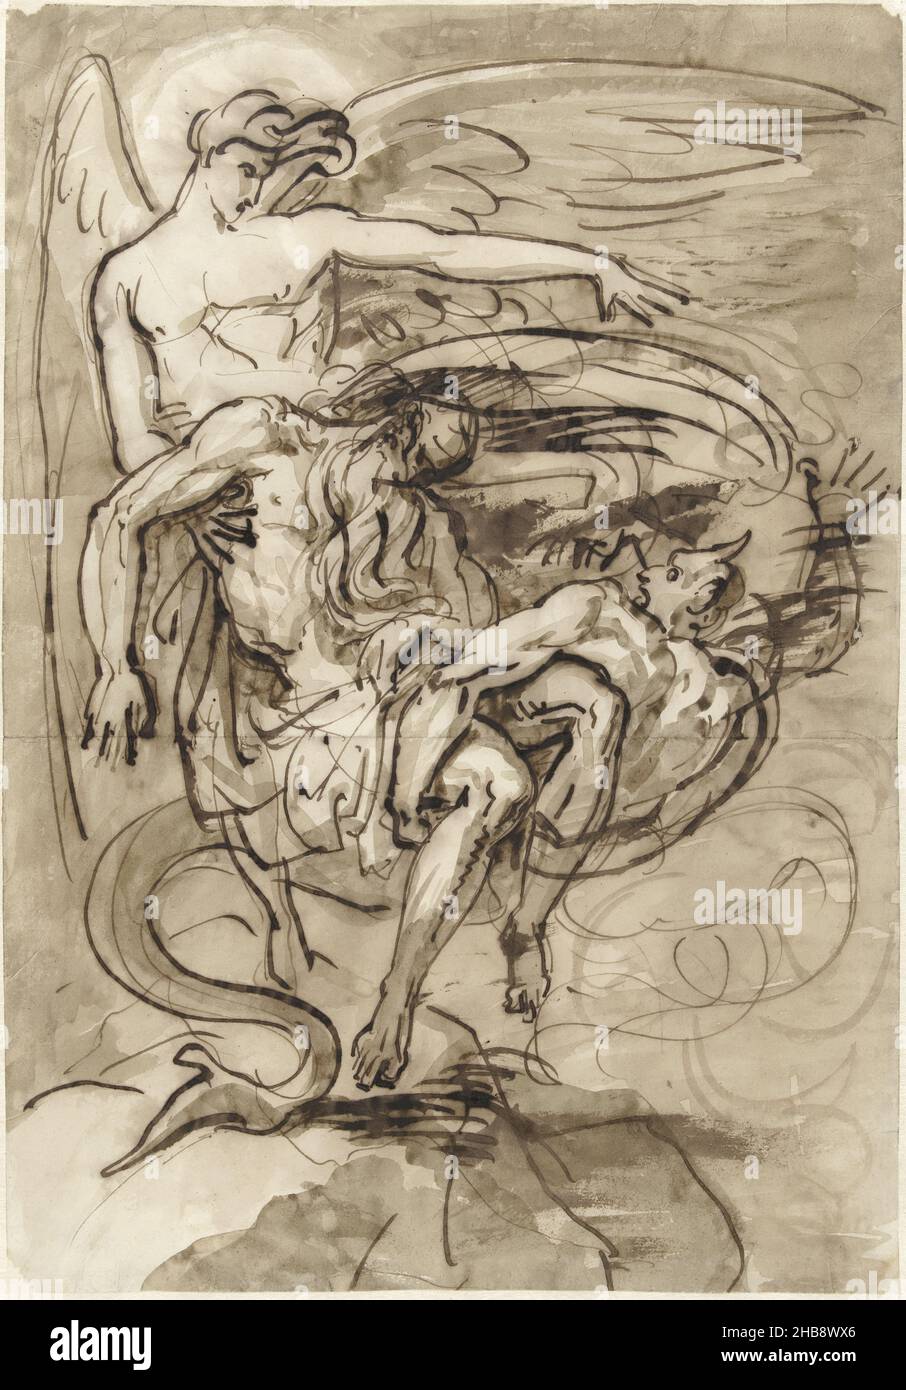 Battle between angel and devil for the soul of a man, draughtsman: David Pièrre Giottino Humbert de Superville, 1780 - 1849, paper, brush, height 363 mm × width 253 mm Stock Photo